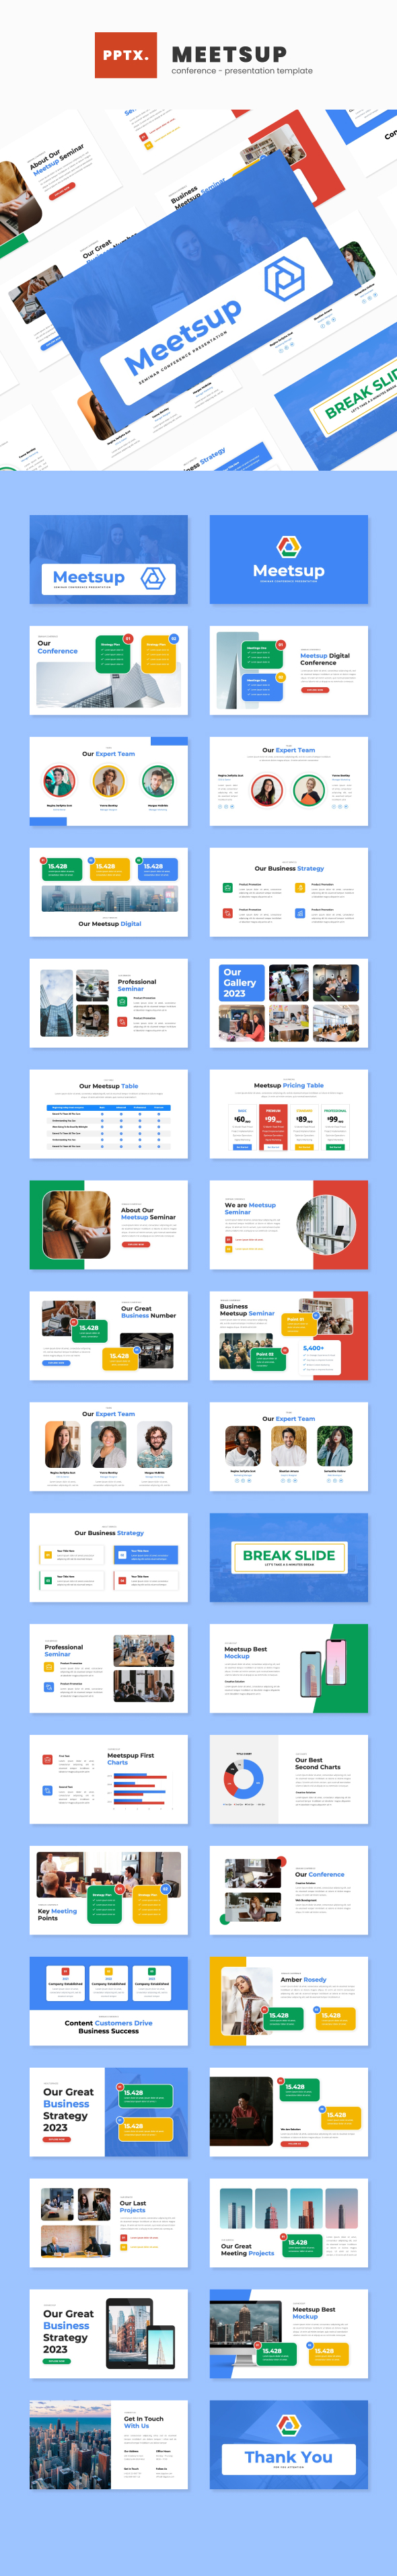 [DOWNLOAD]Meetsup - Conference PPT Template